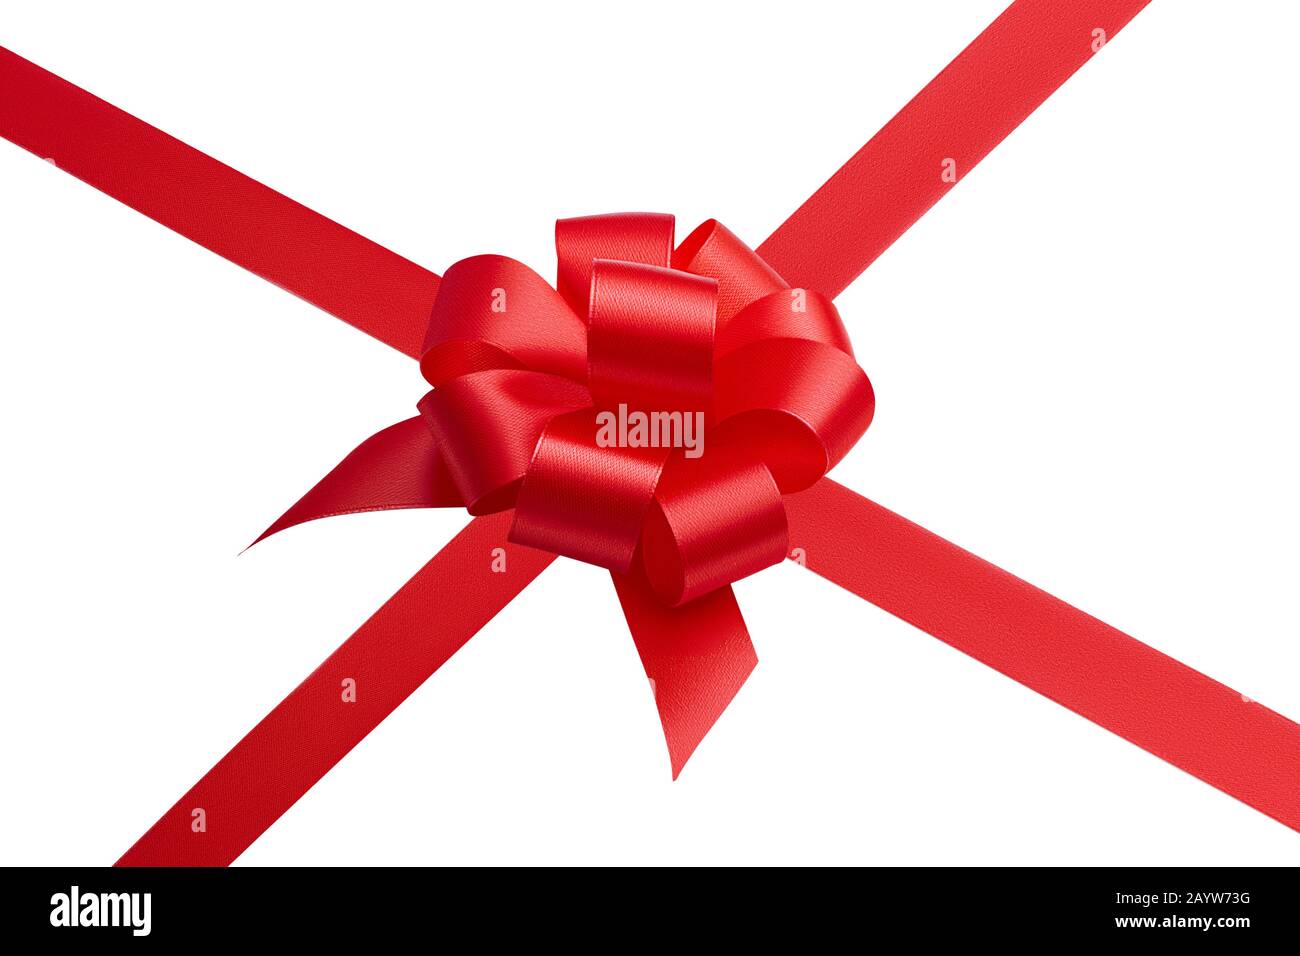 Red Gift Ribbon Bow Isolated On White Background 3d Rendering Stock Photo -  Download Image Now - iStock